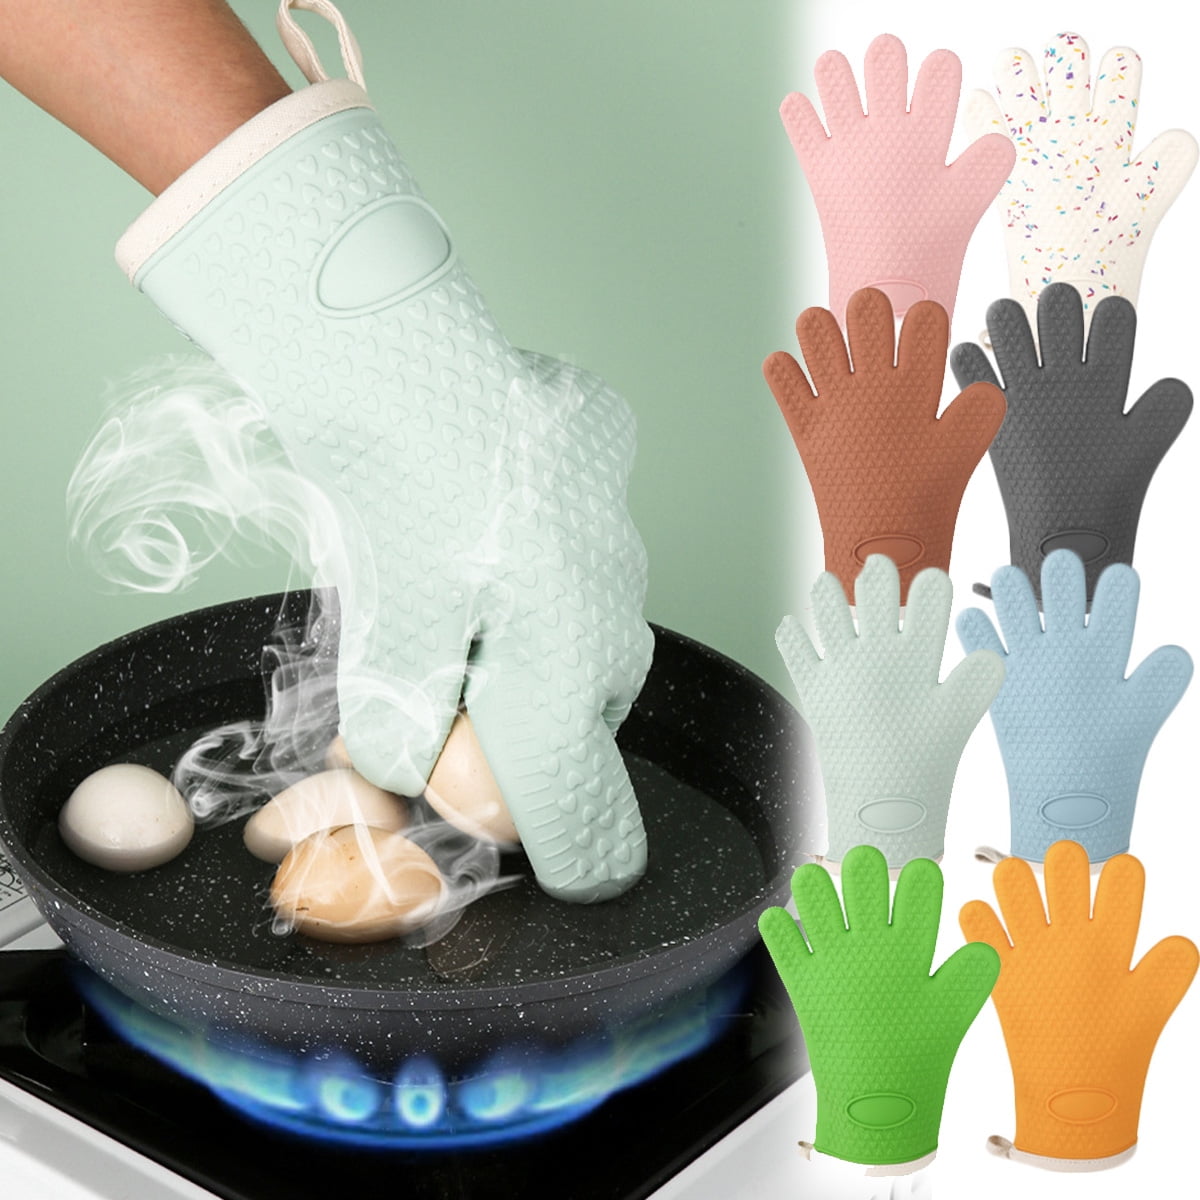 CZSYZCZS Oven Gloves Oven Mitts Heat Resistant Oven Mitts with Fingers,  Cooking Gloves for BBQ, Grilling, Baking,Cutting, Welding, Smoker  Fireplace，2